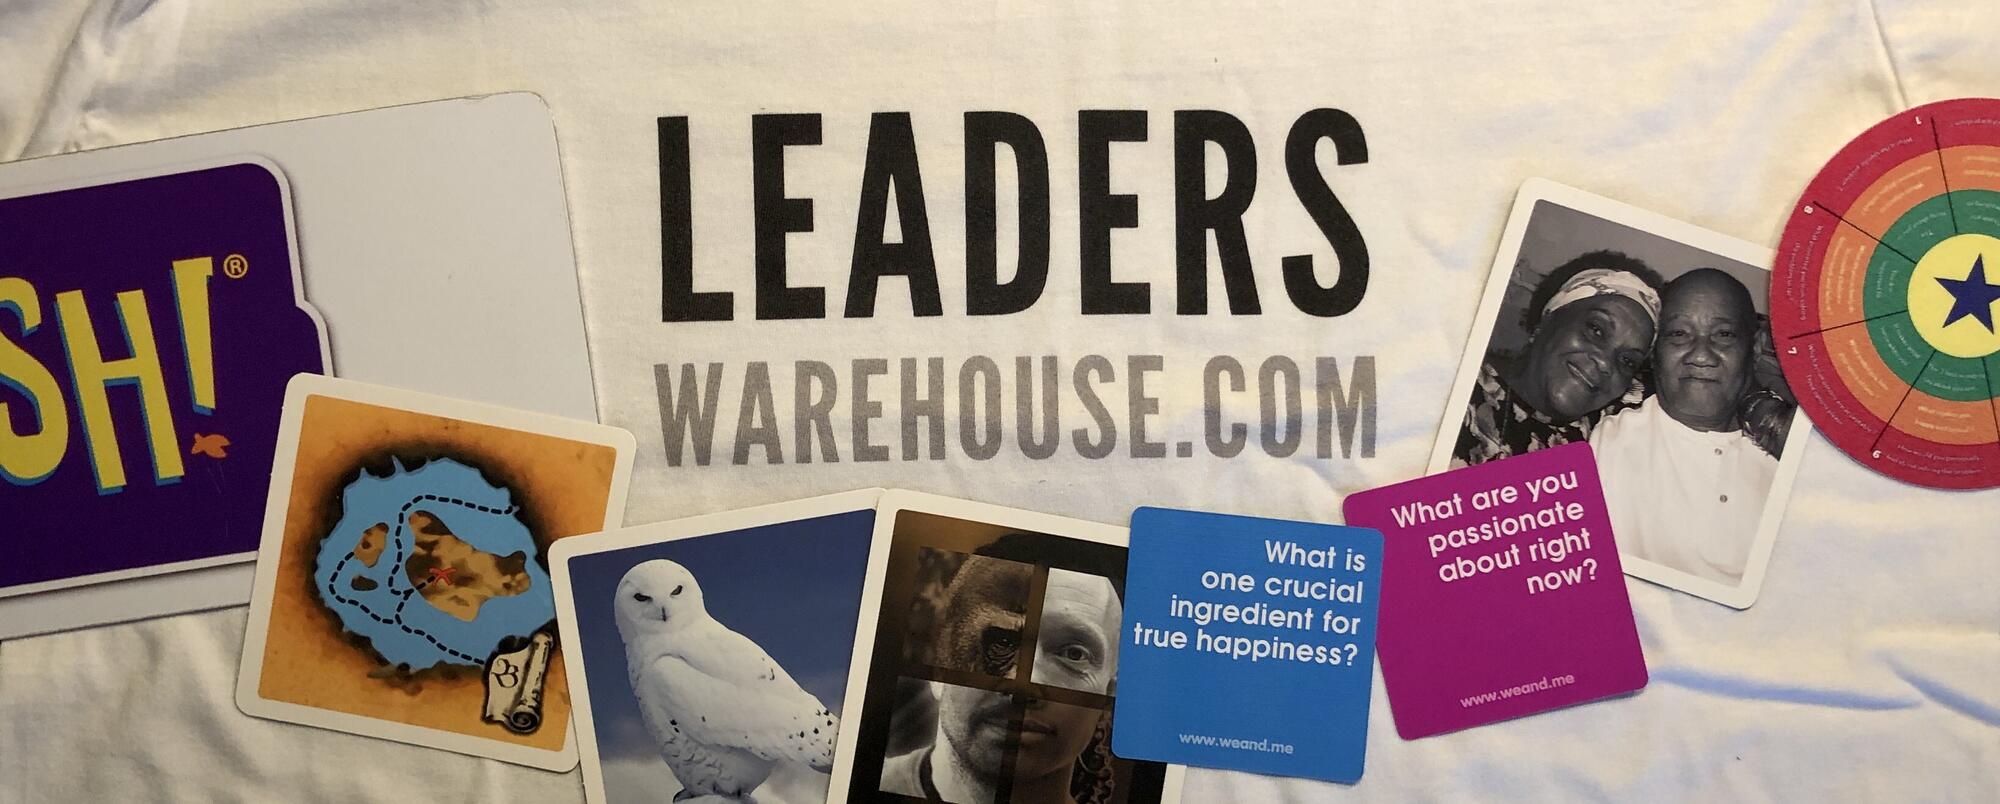 LEADERS WAREHOUSE tools and training